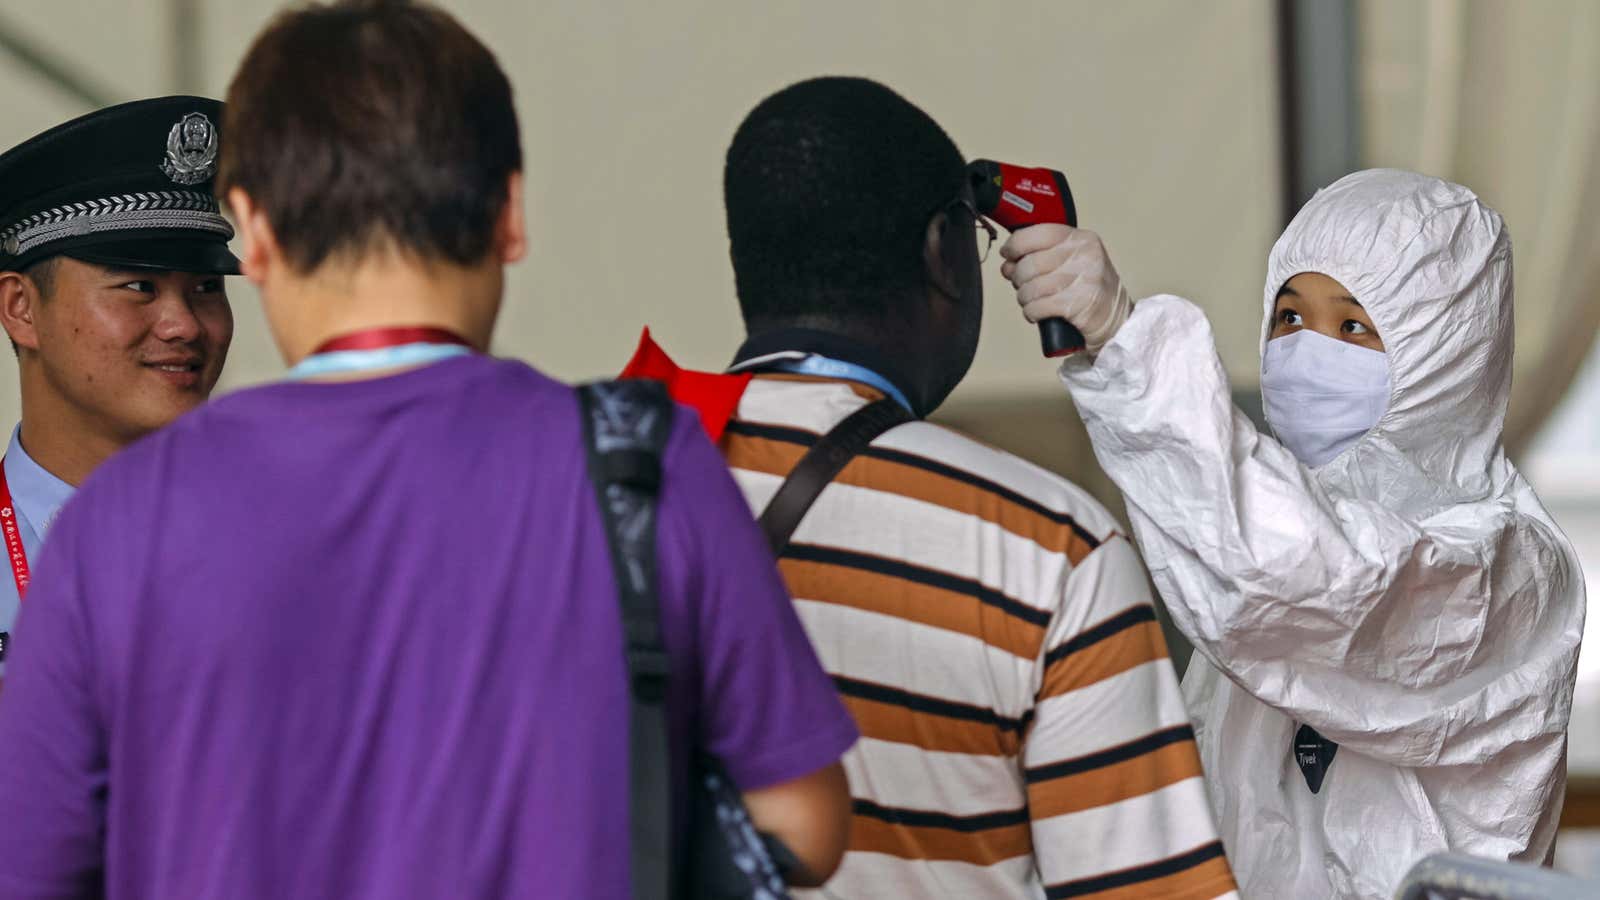 People have their temperature taken at the entrance of the Canton Fair in Guangzhou during the Ebola crisis in  2014.